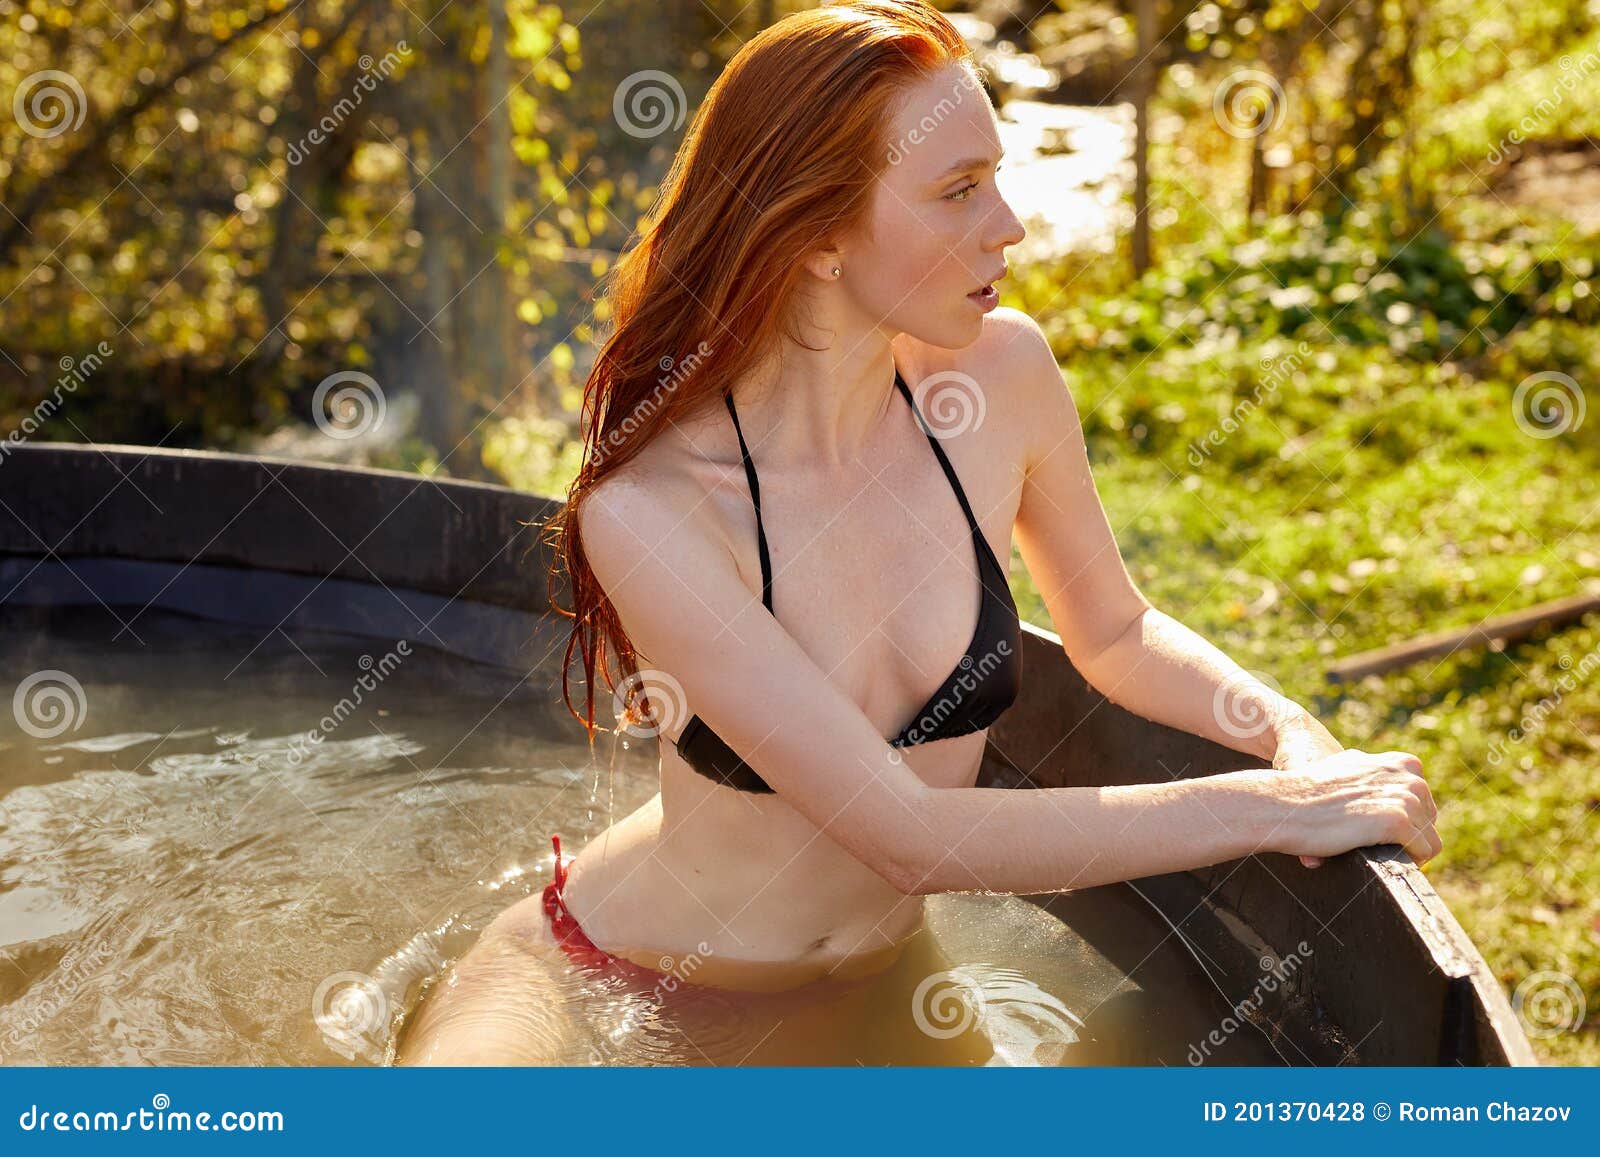 Redheads Outdoor